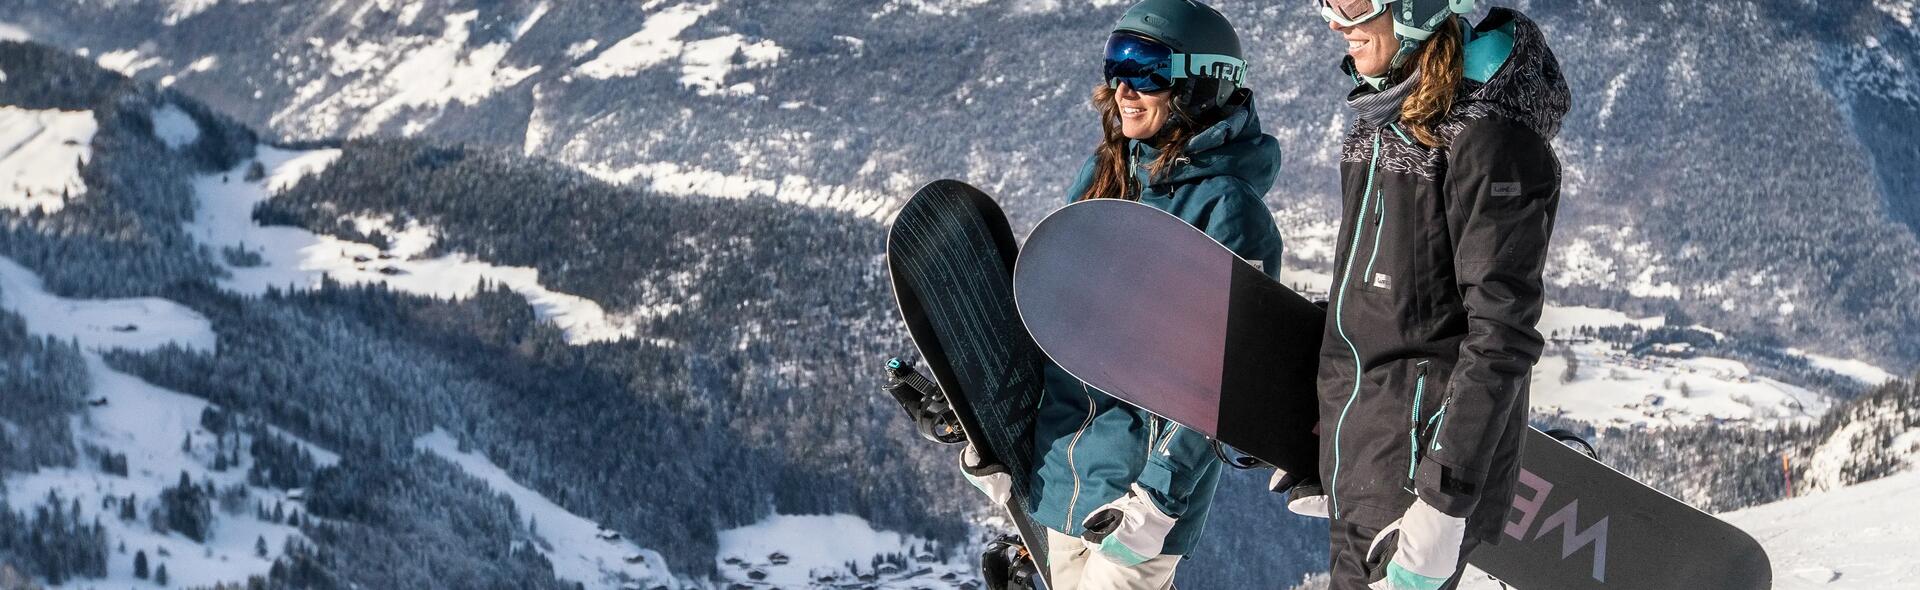 how to carry your snowboard - wedze tips  